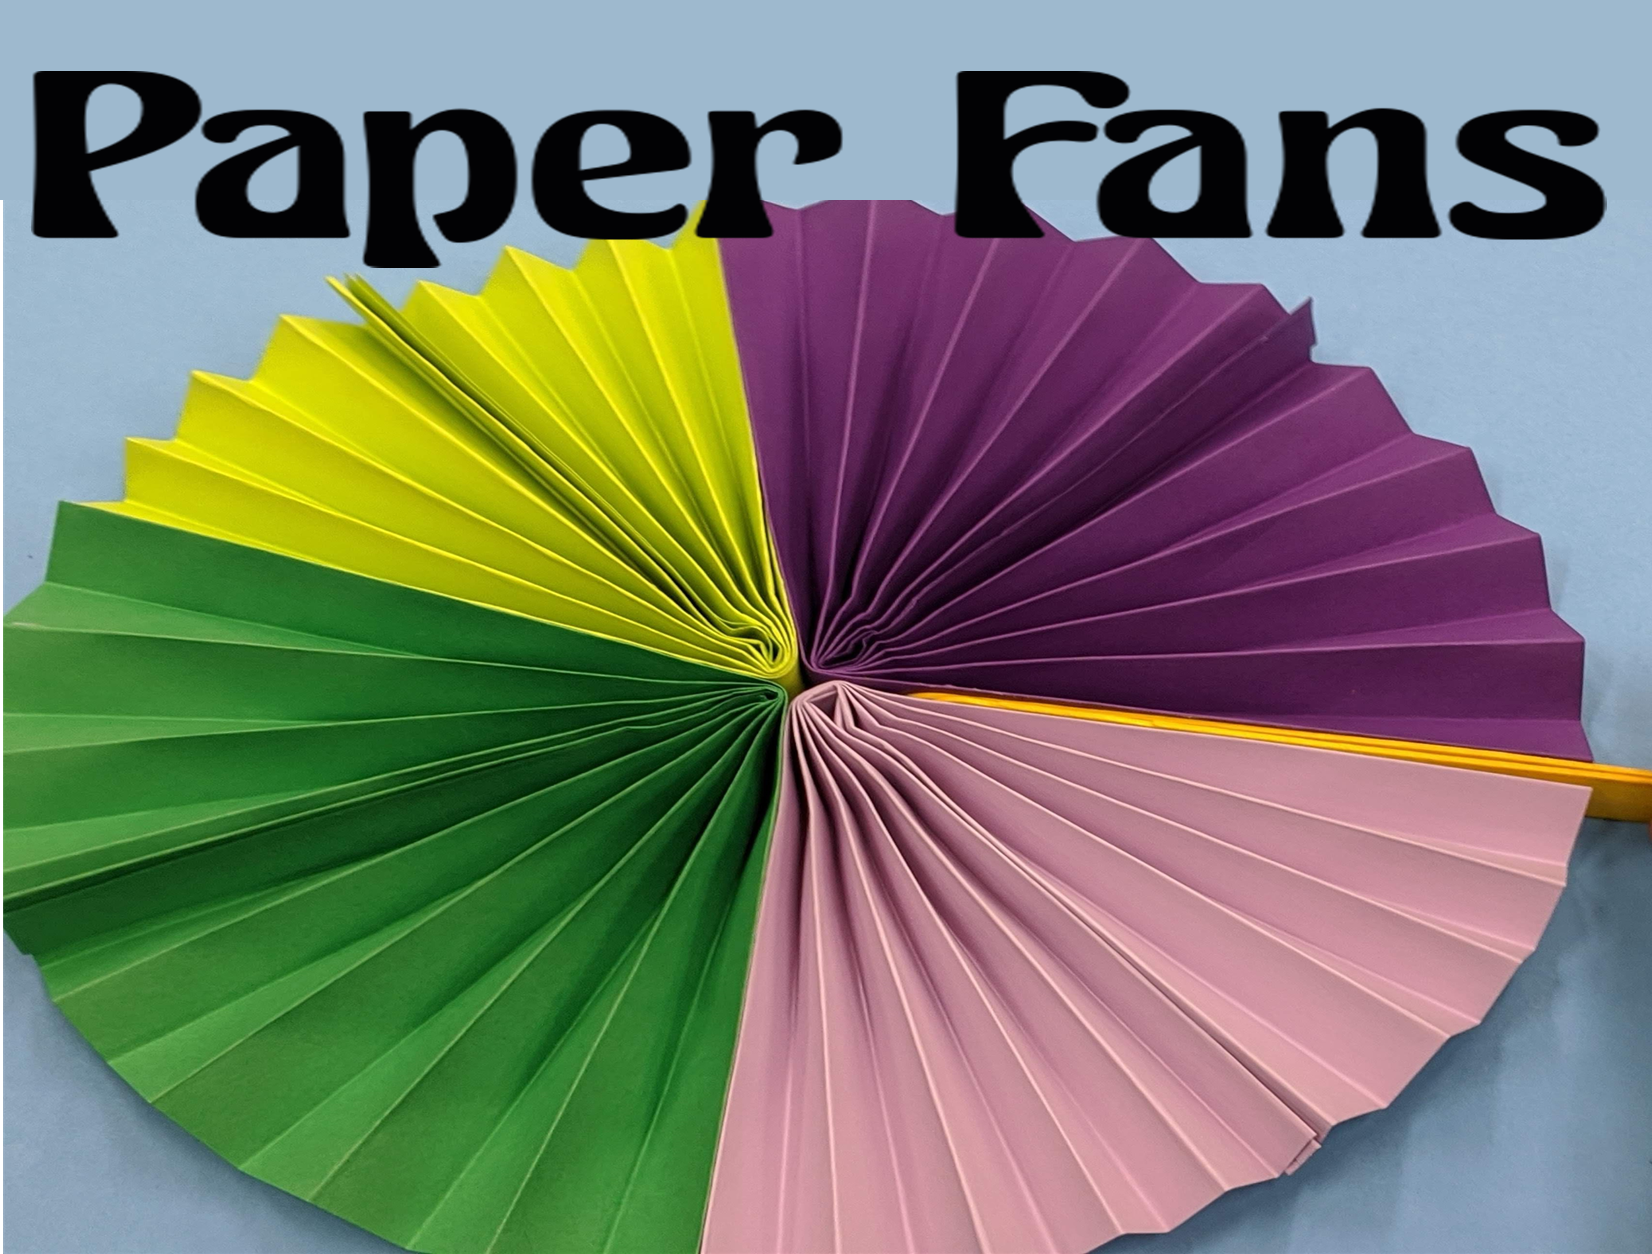 Paper Fan craft available at the Main Library for curbside pickup starting the week of August 24th. Get them while supplies last.